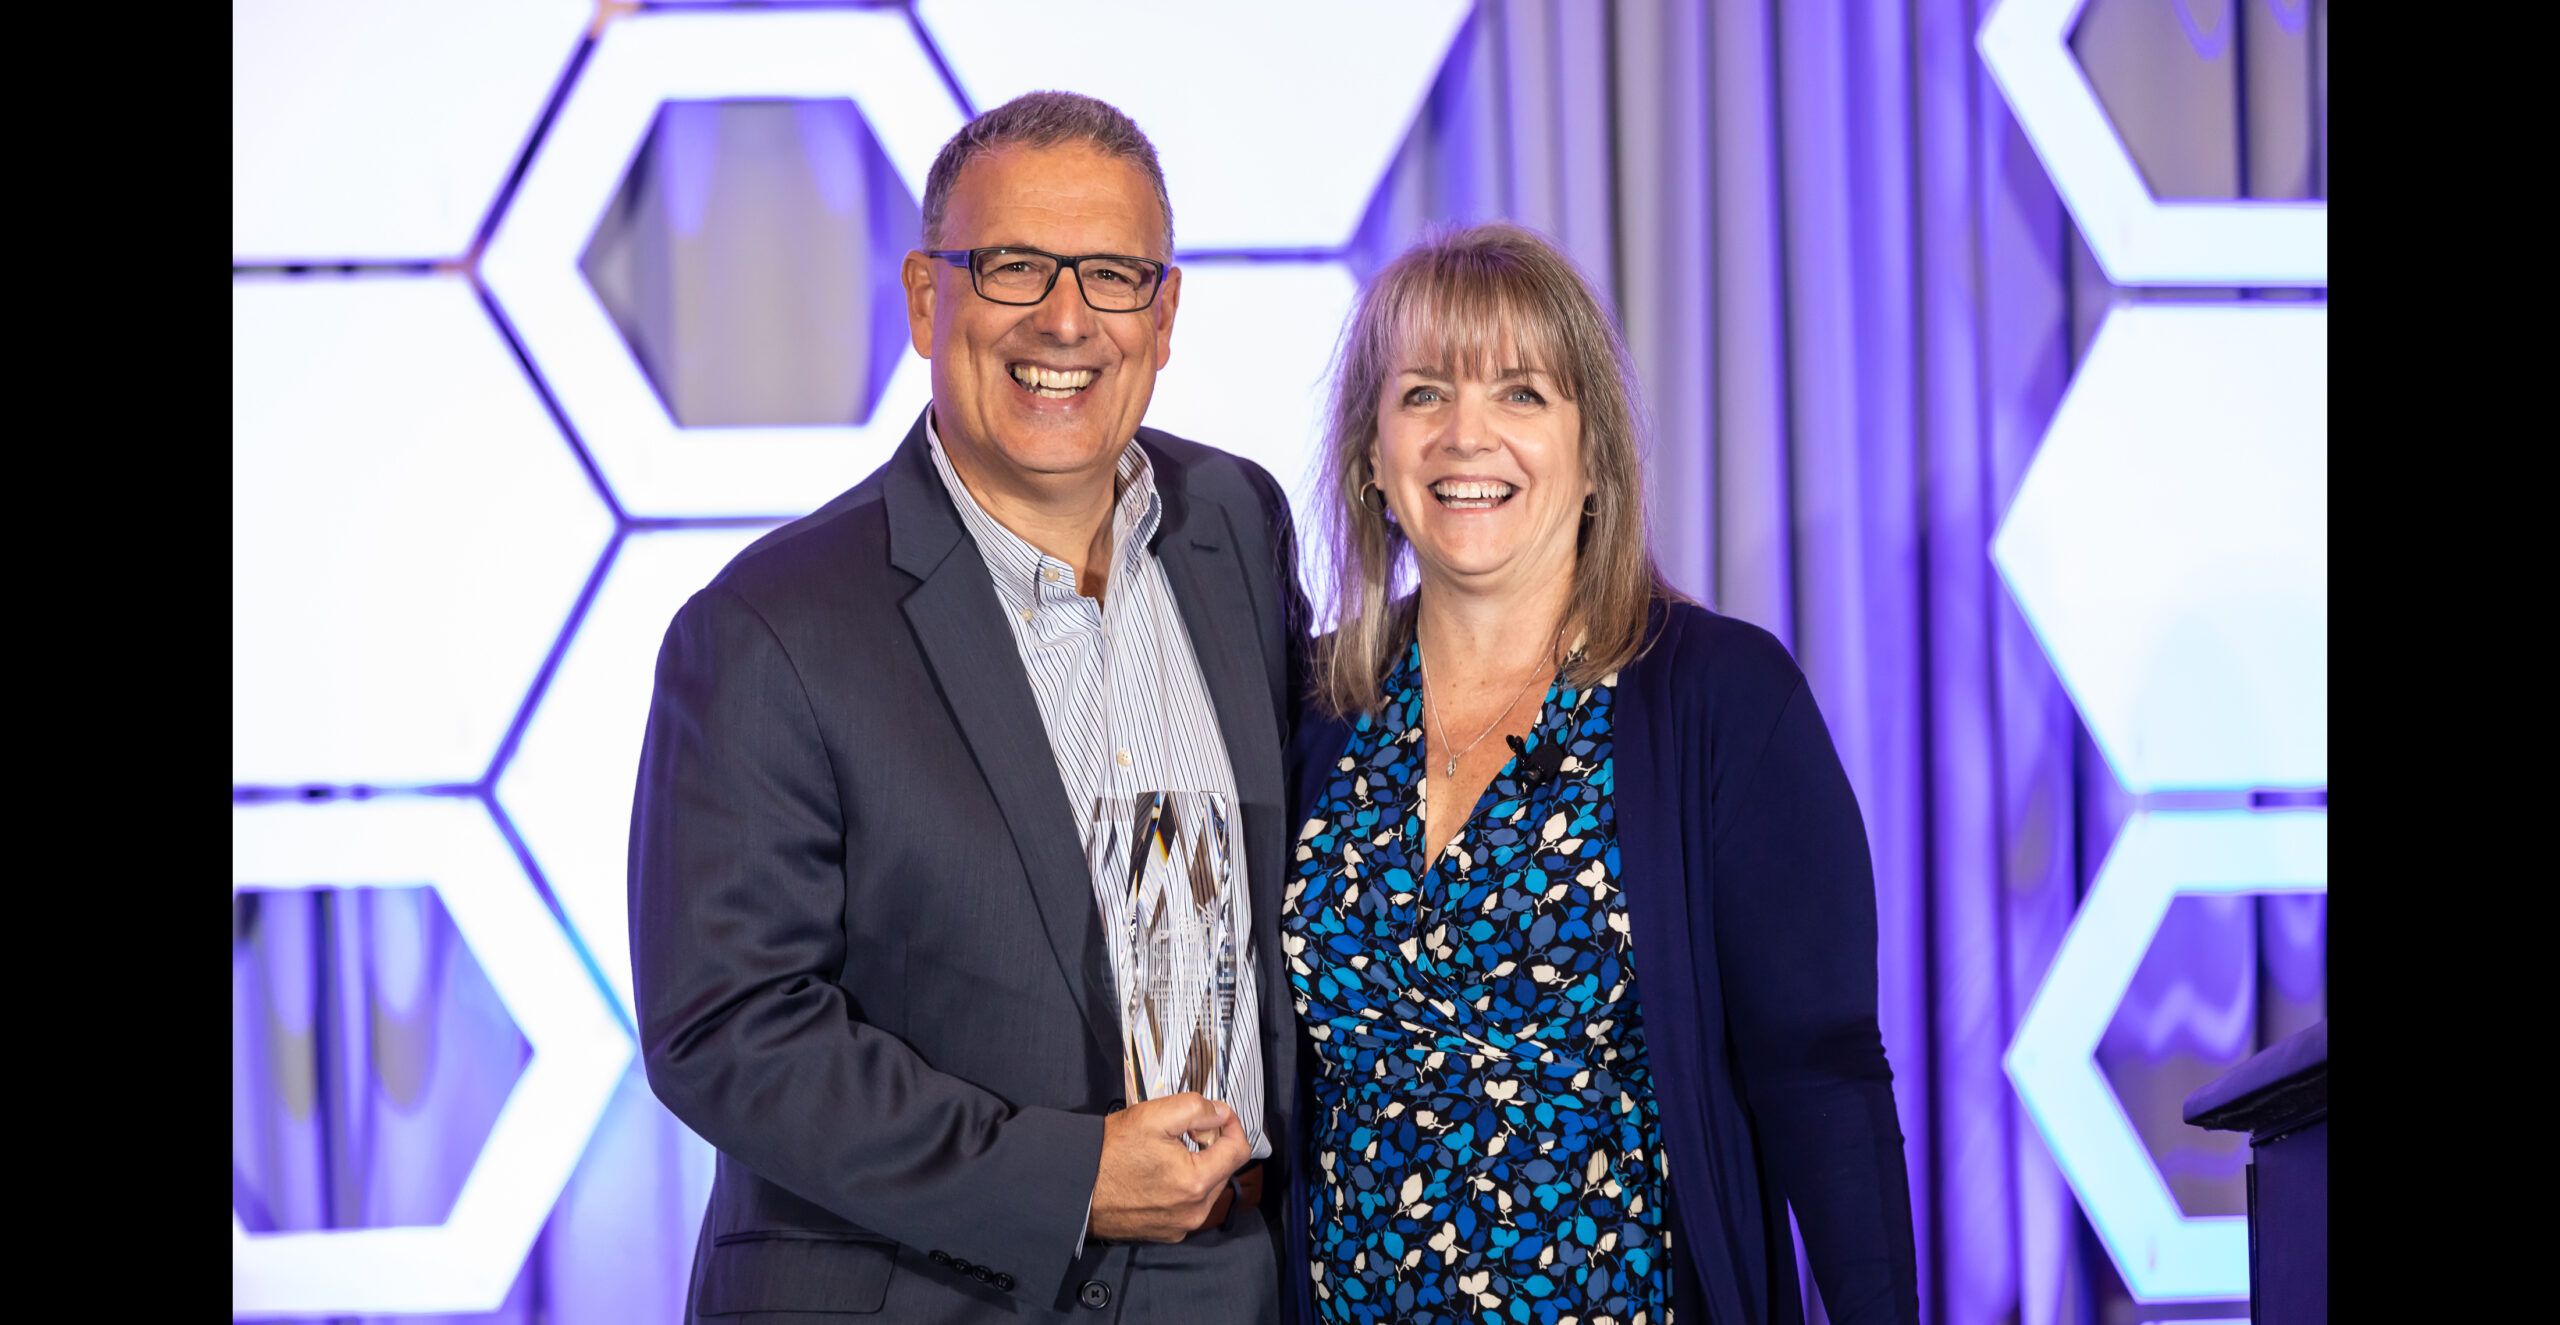 Master Power Transmission Owner Michael Cinquemani (left) with PTDA Executive Vice President and CEO Ann Ardott after Cinquemani received PTDA's Warren Pike Award on Oct. 28 during the PTDA 2022 Industry Summit n Nashville, Tennessee.